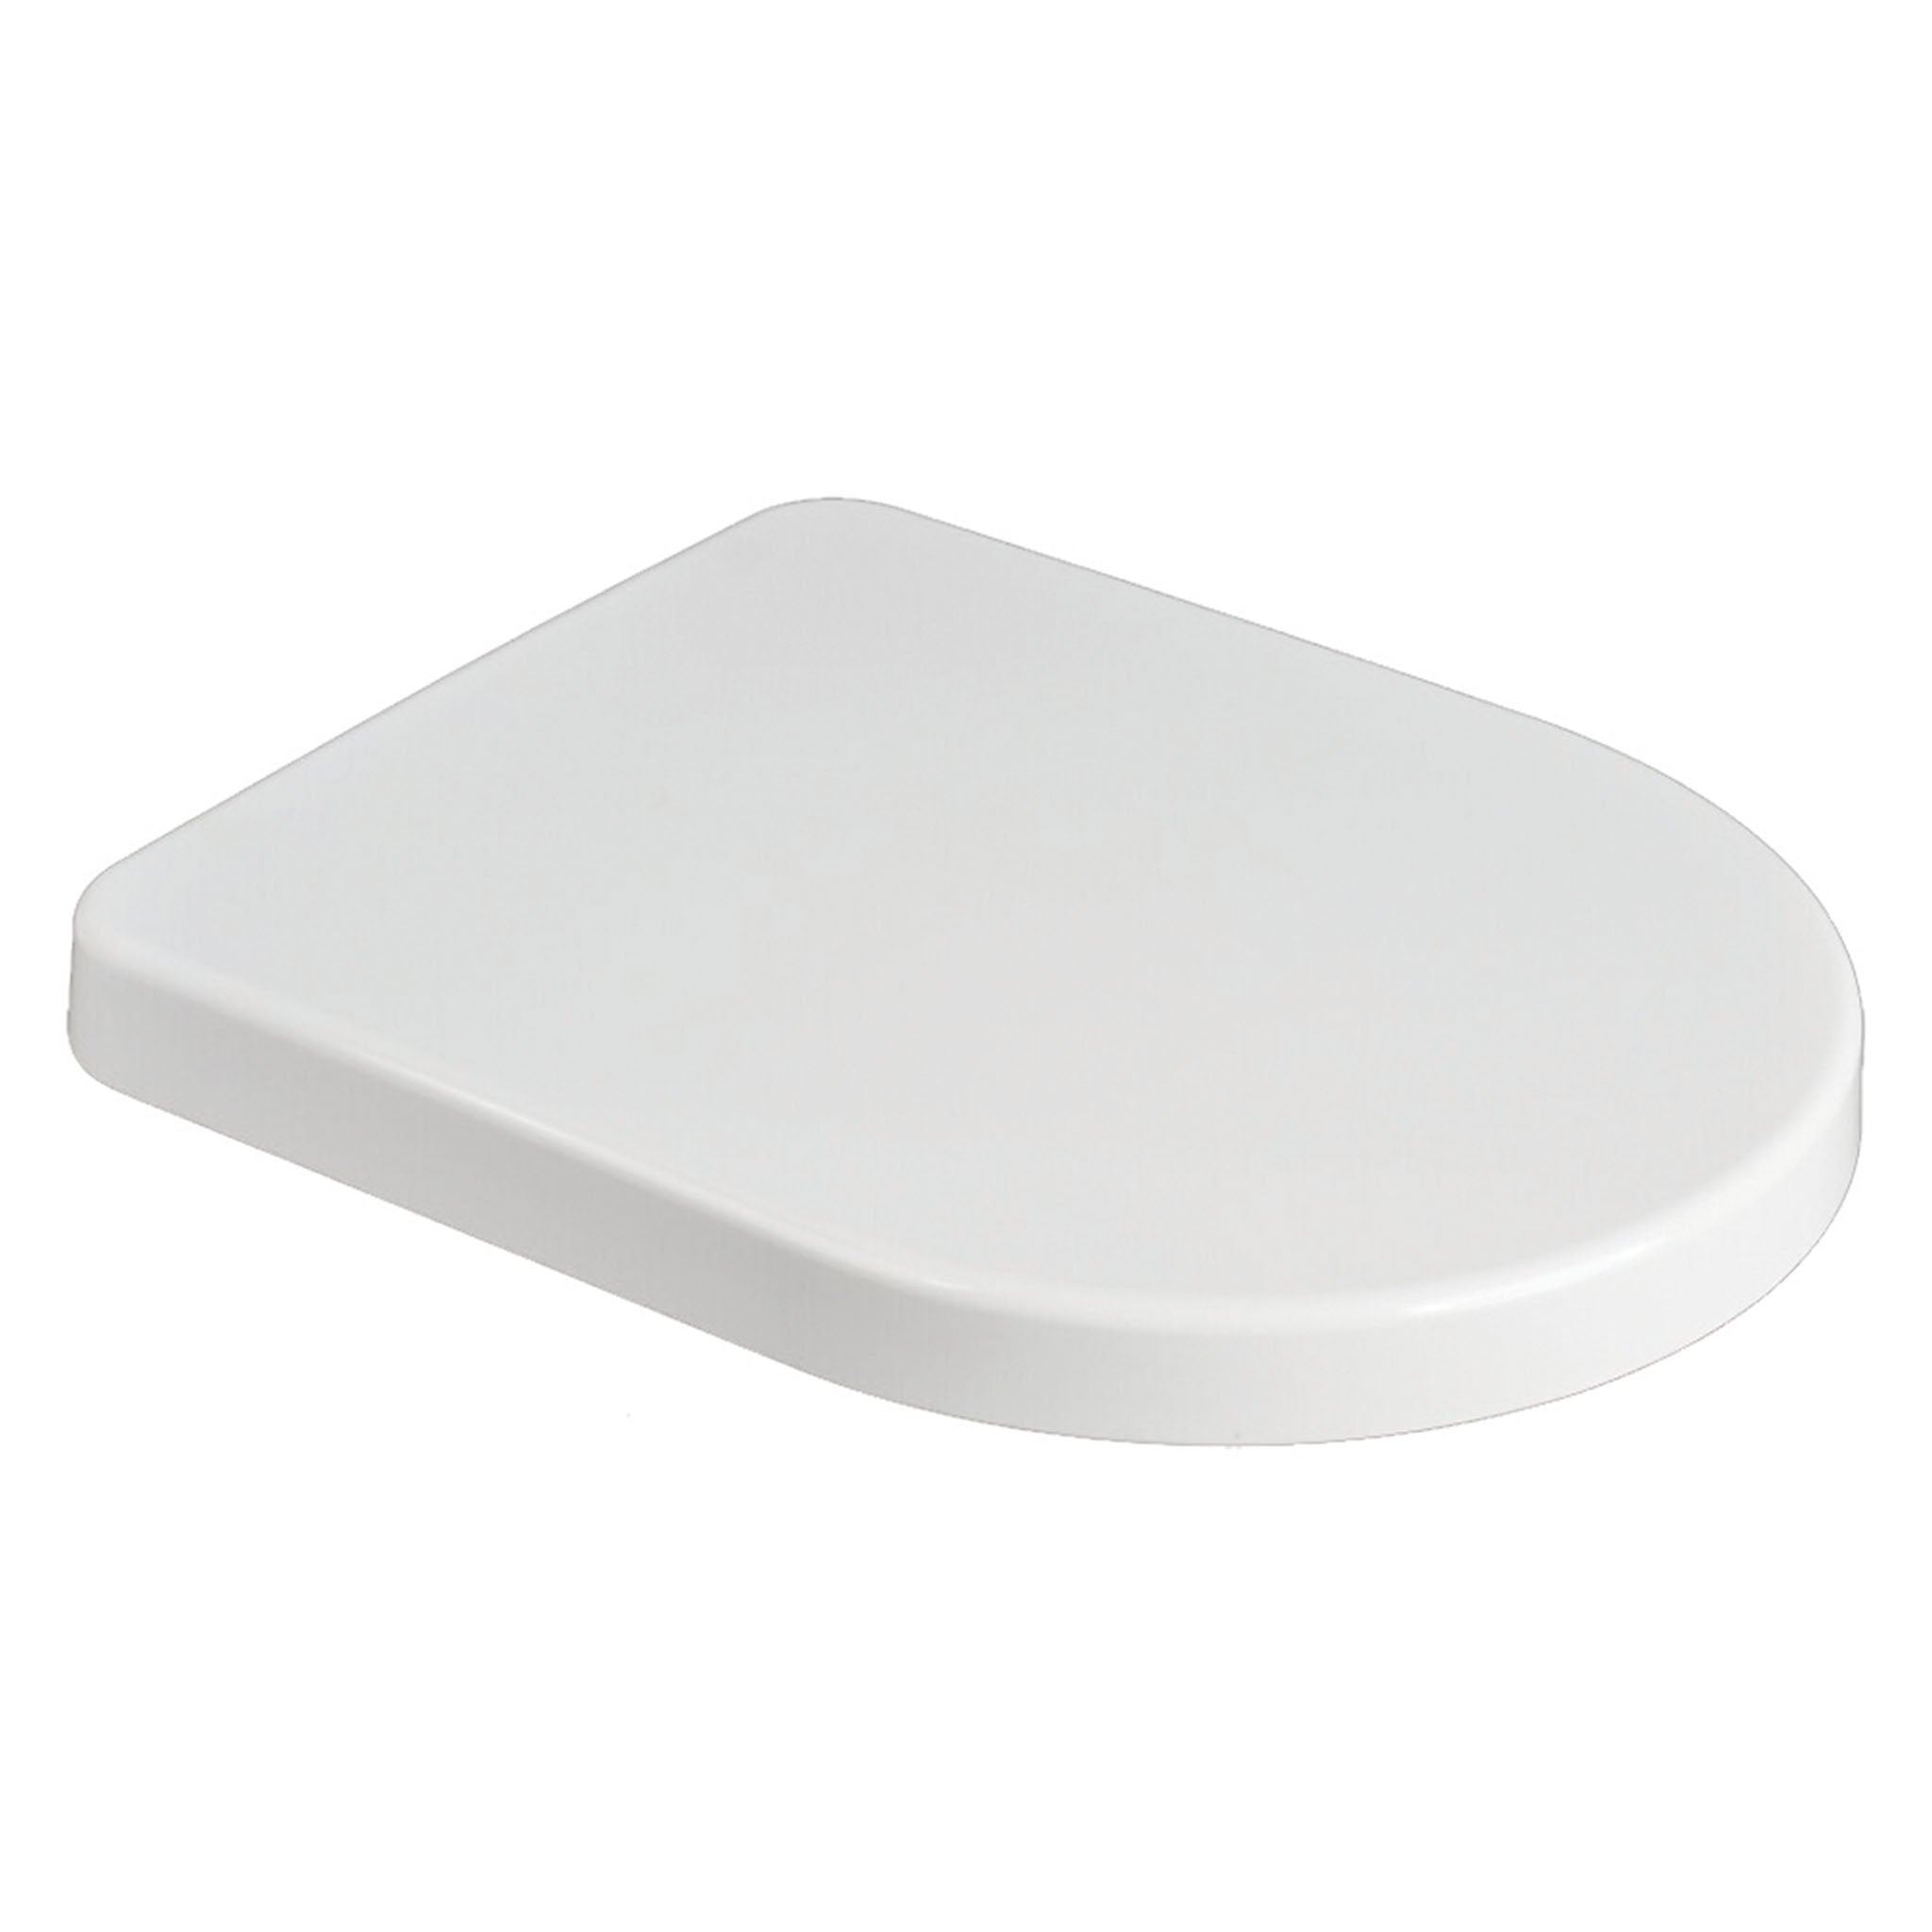 MyLife DS D Shaped Soft Close Quick Release Toilet Seat